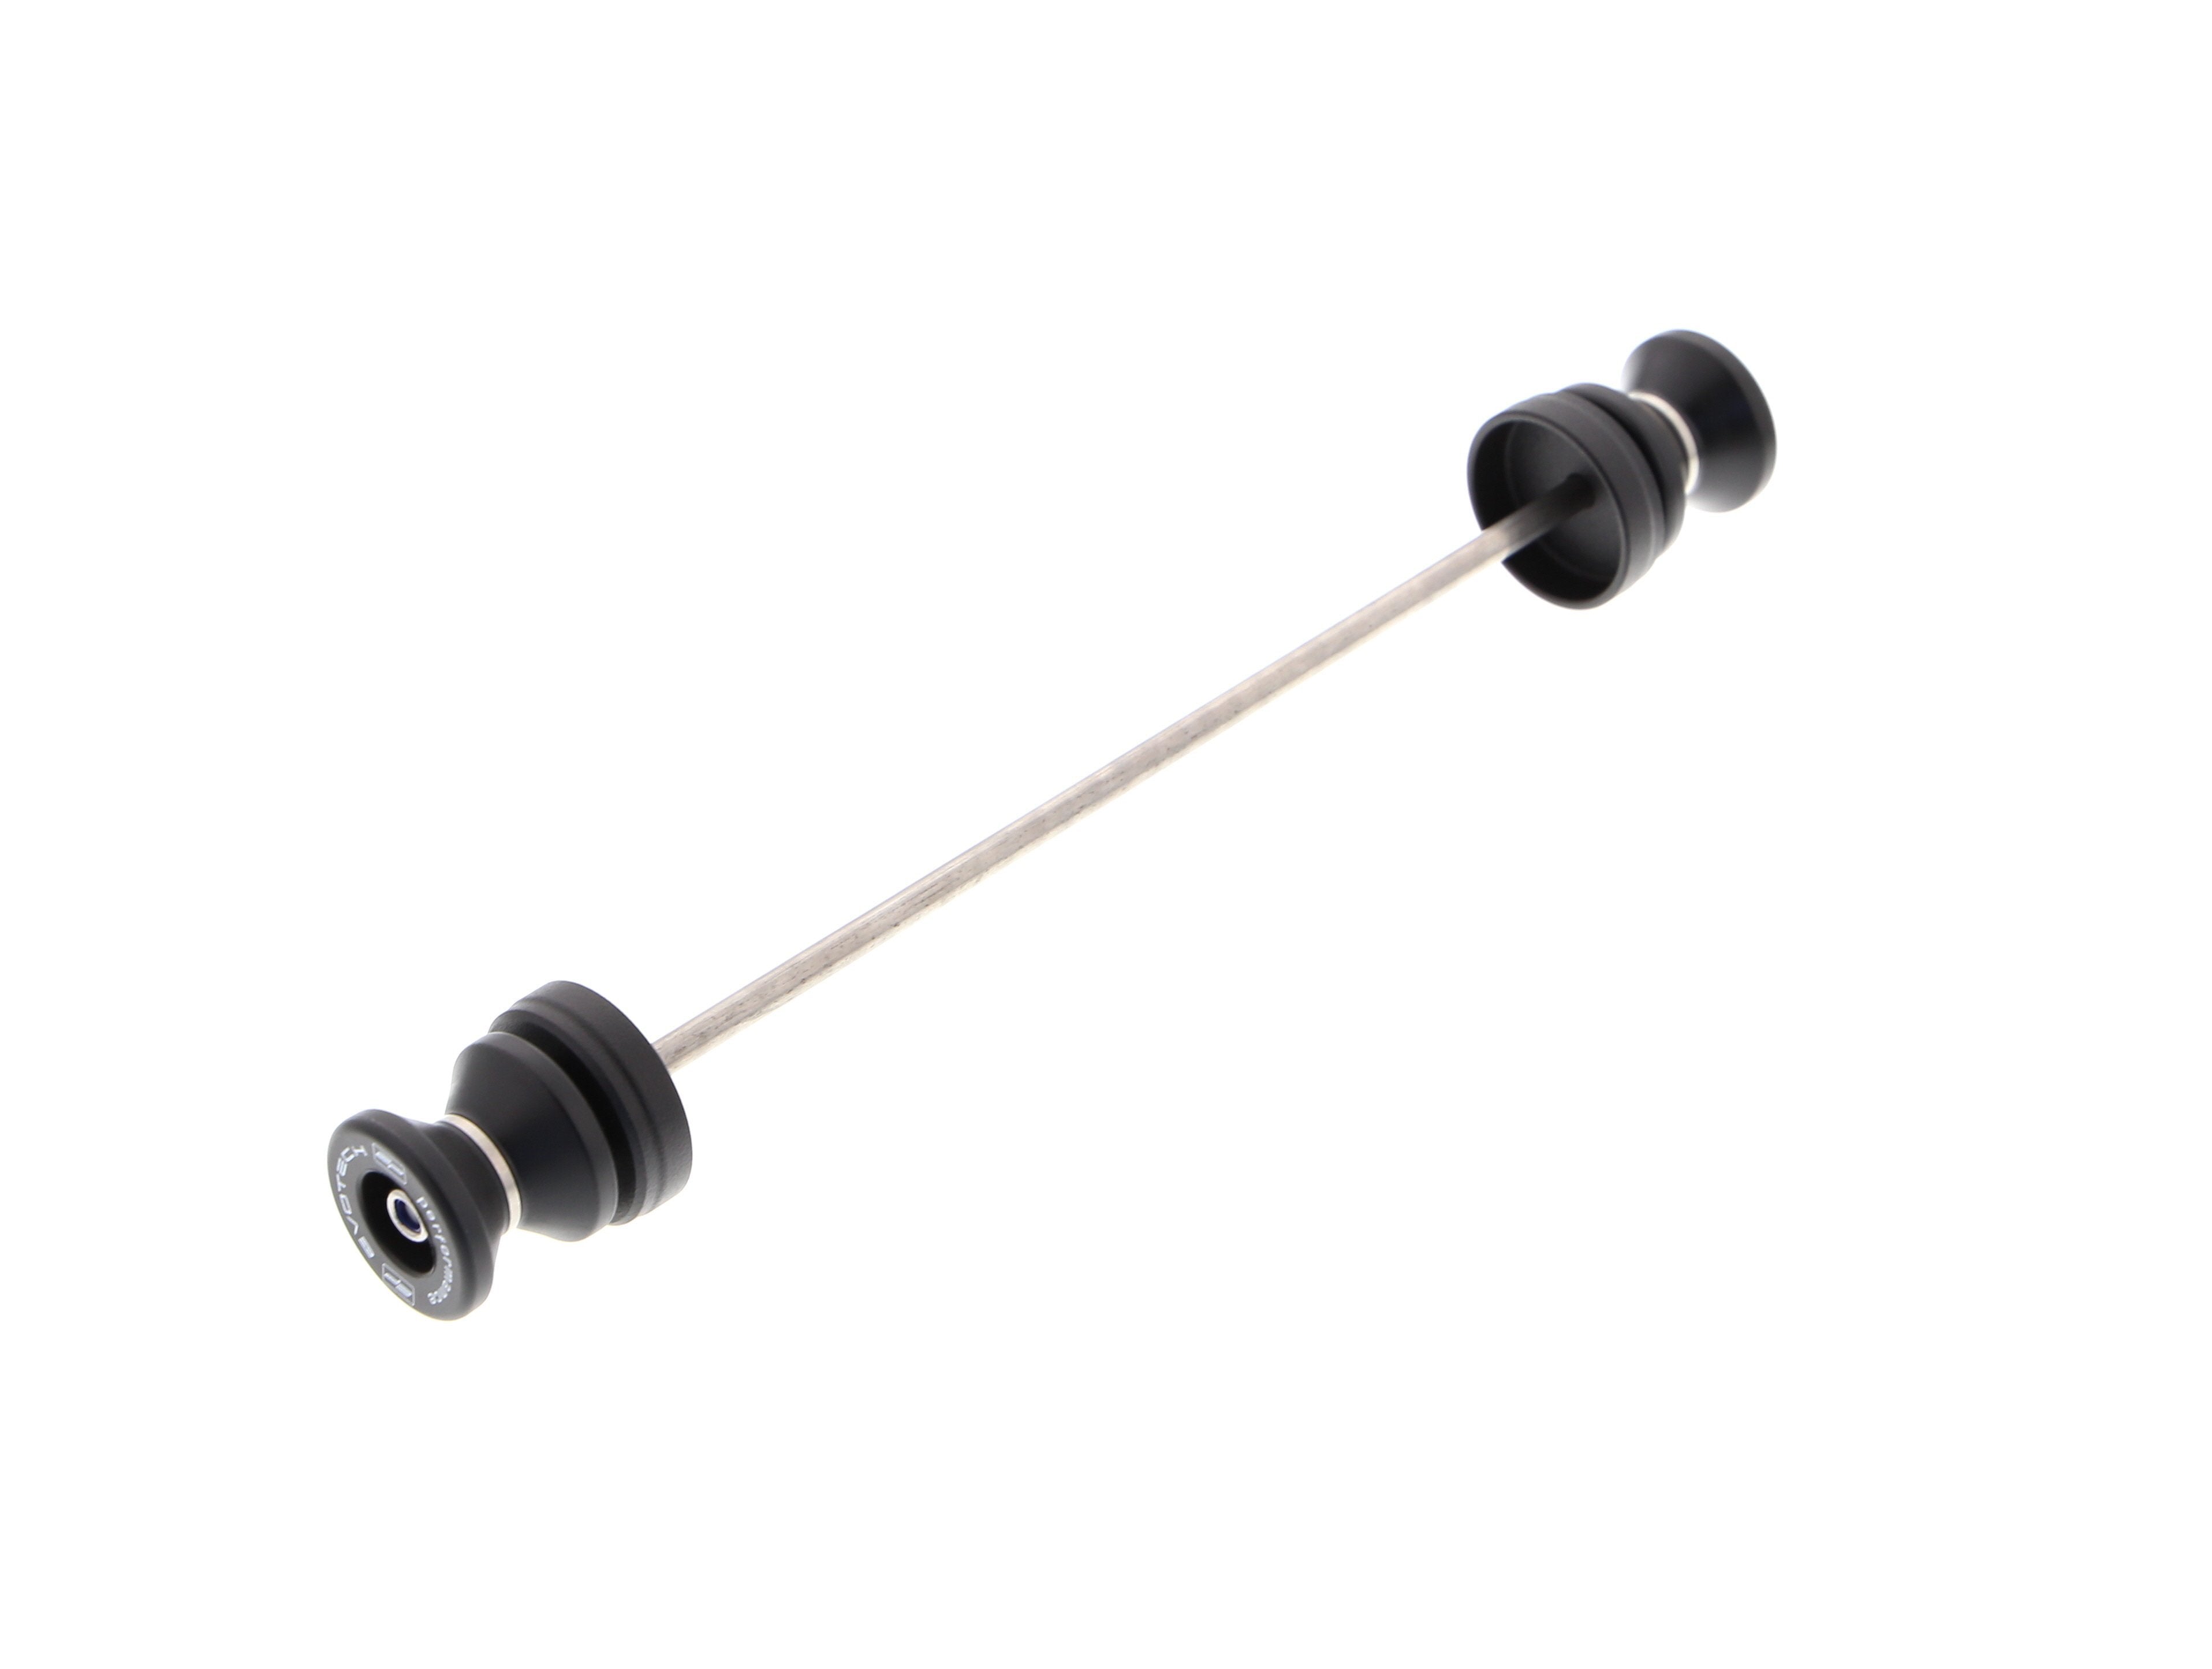 EP Paddock Stand Bobbins for the Ducati Scrambler Urban Enduro comprises a spindle rod with EPâs signature nylon paddock stand bobbins either end with precision shaped aluminium spacer.